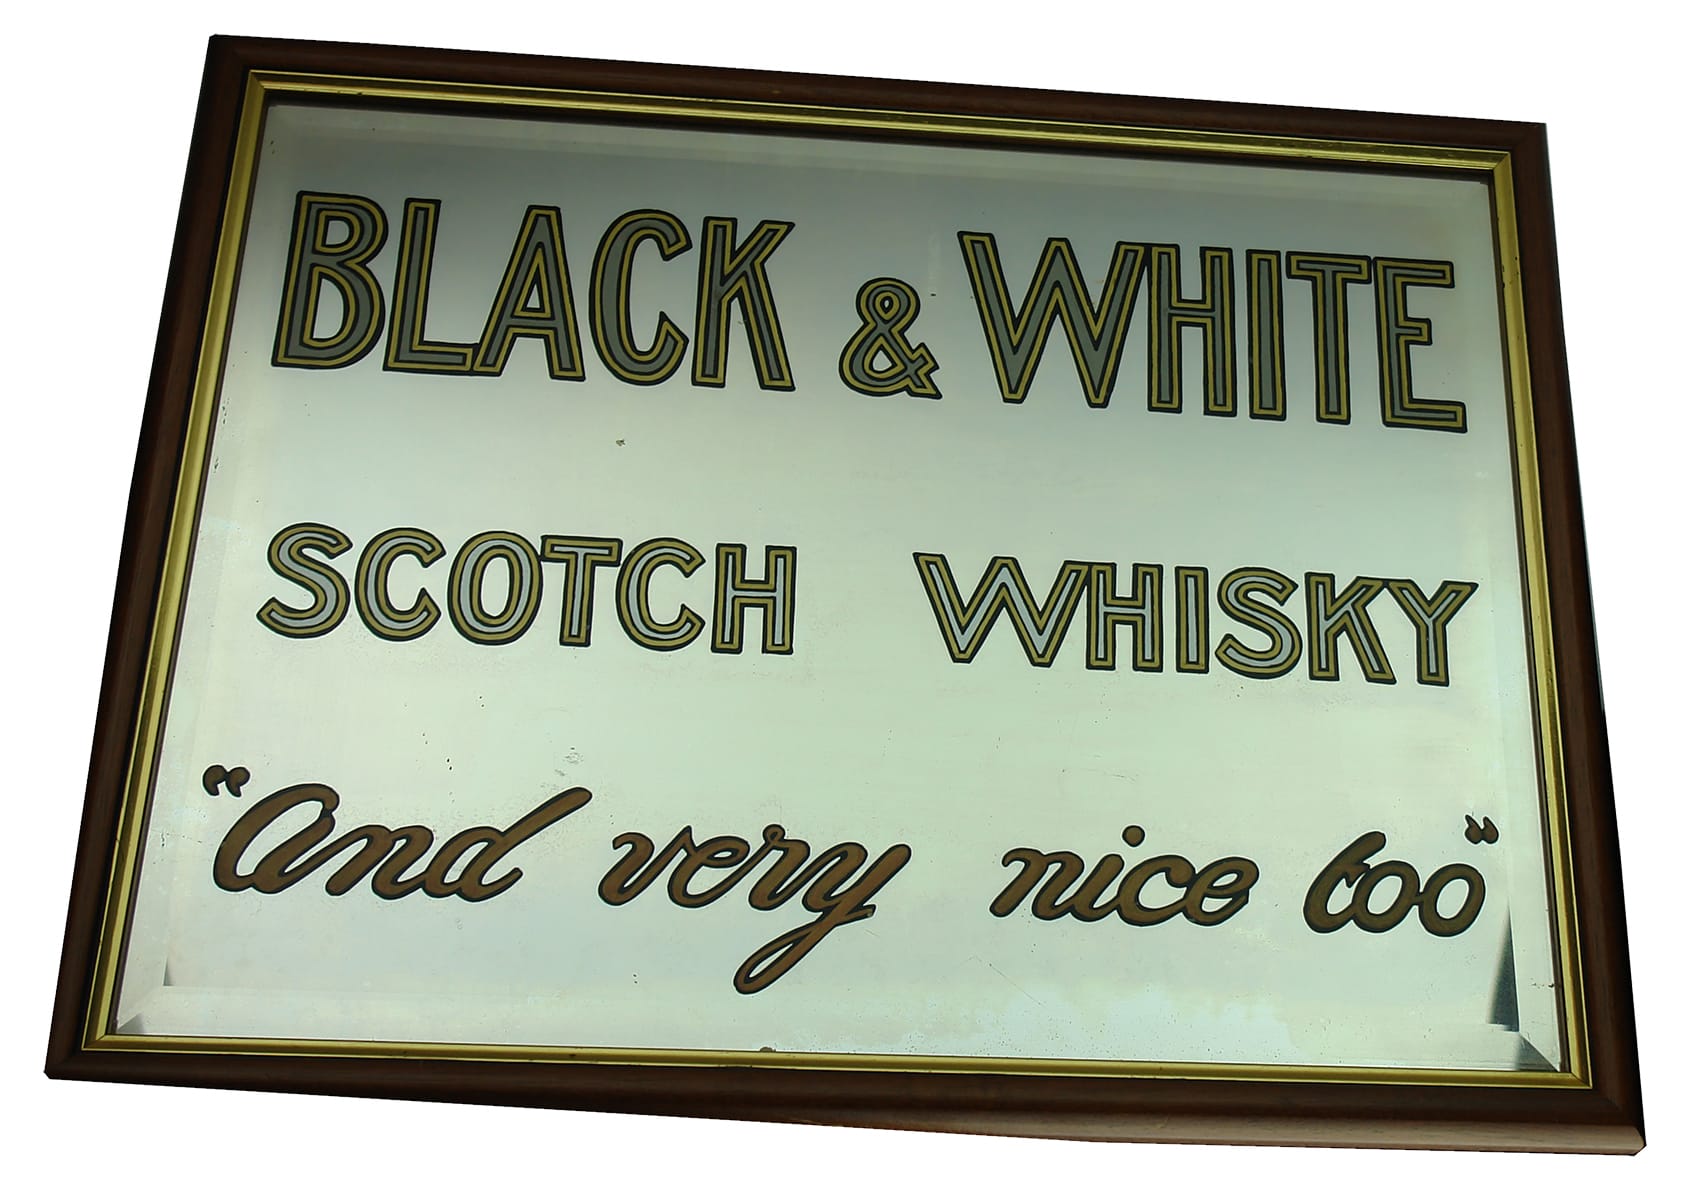 Black & White Scotch Whisky and very nice too Advertising Mirror